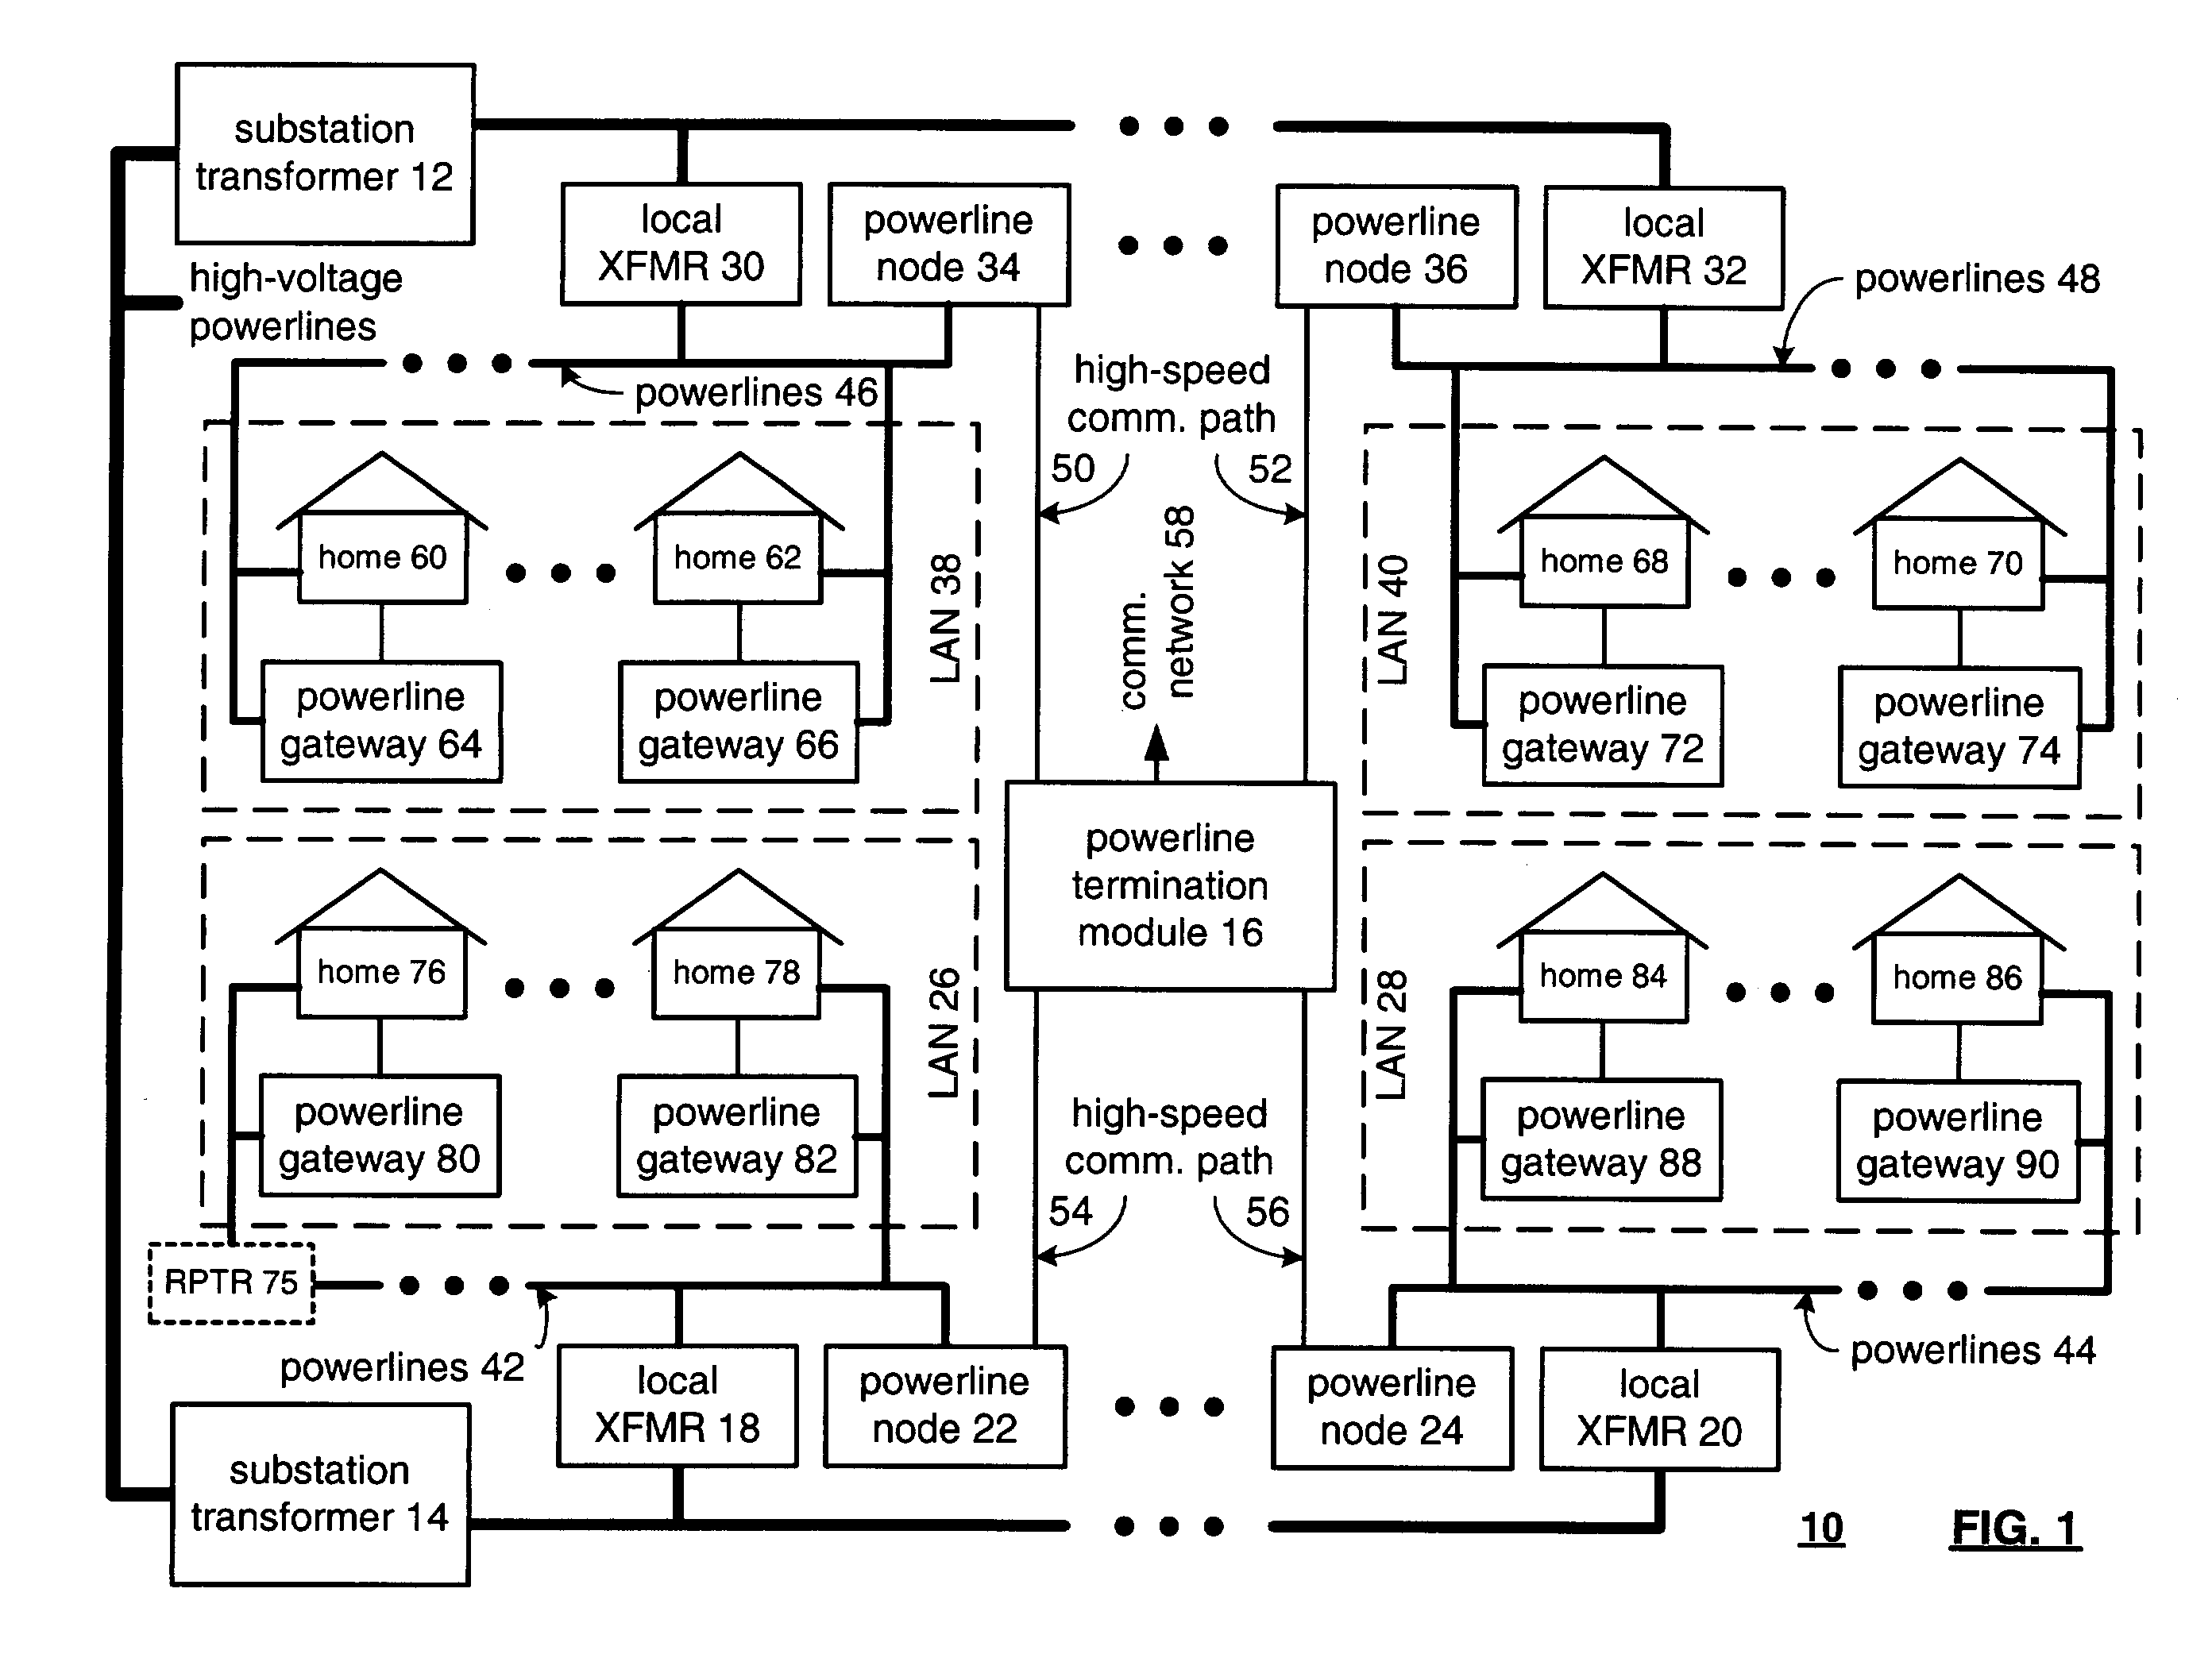 Last leg power grid high-speed data transmitter and receiver structures